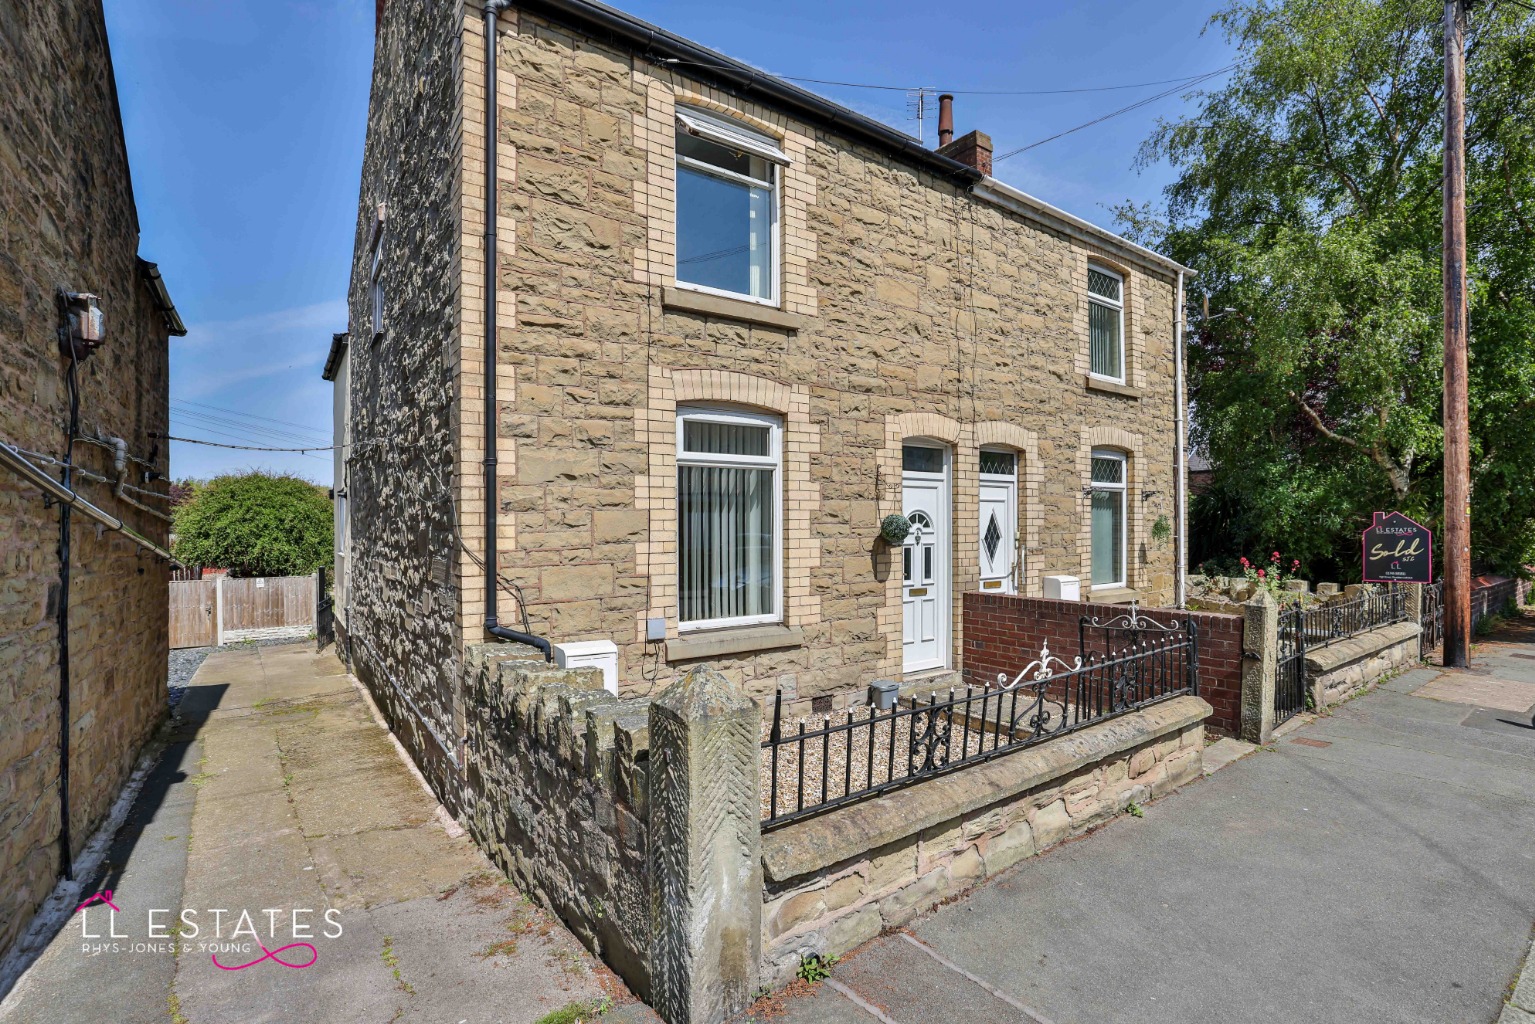 3 bed semi-detached house for sale in Main Road, Flintshire  - Property Image 1